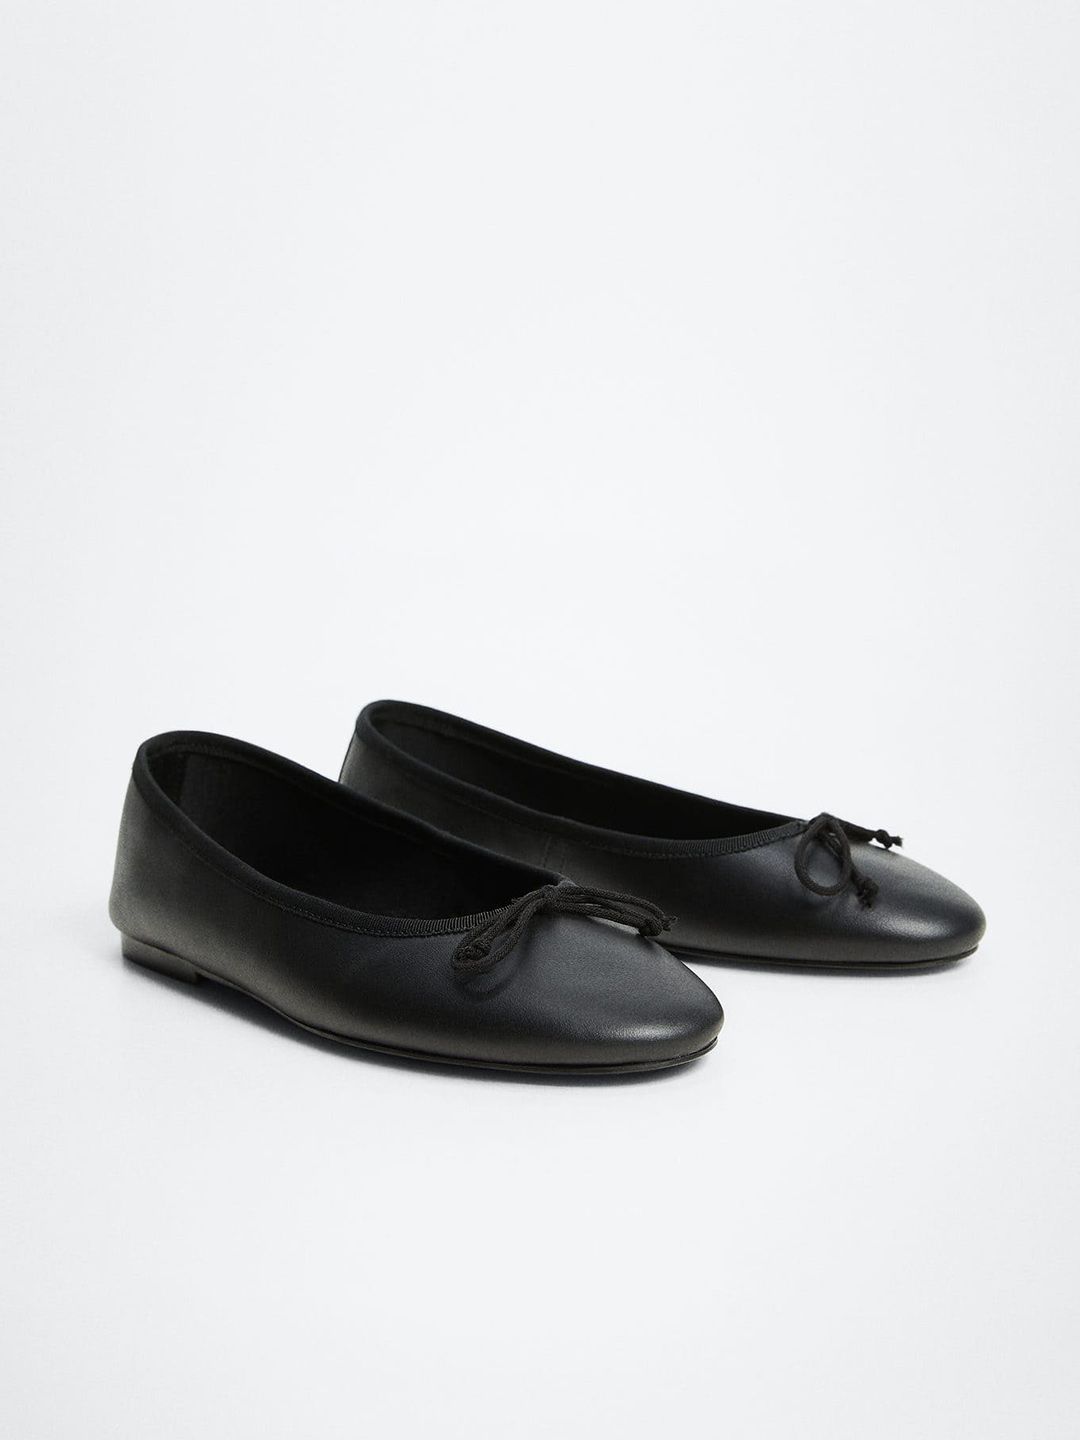 MANGO Women Black Solid Ballerinas with Bow Upper Price in India